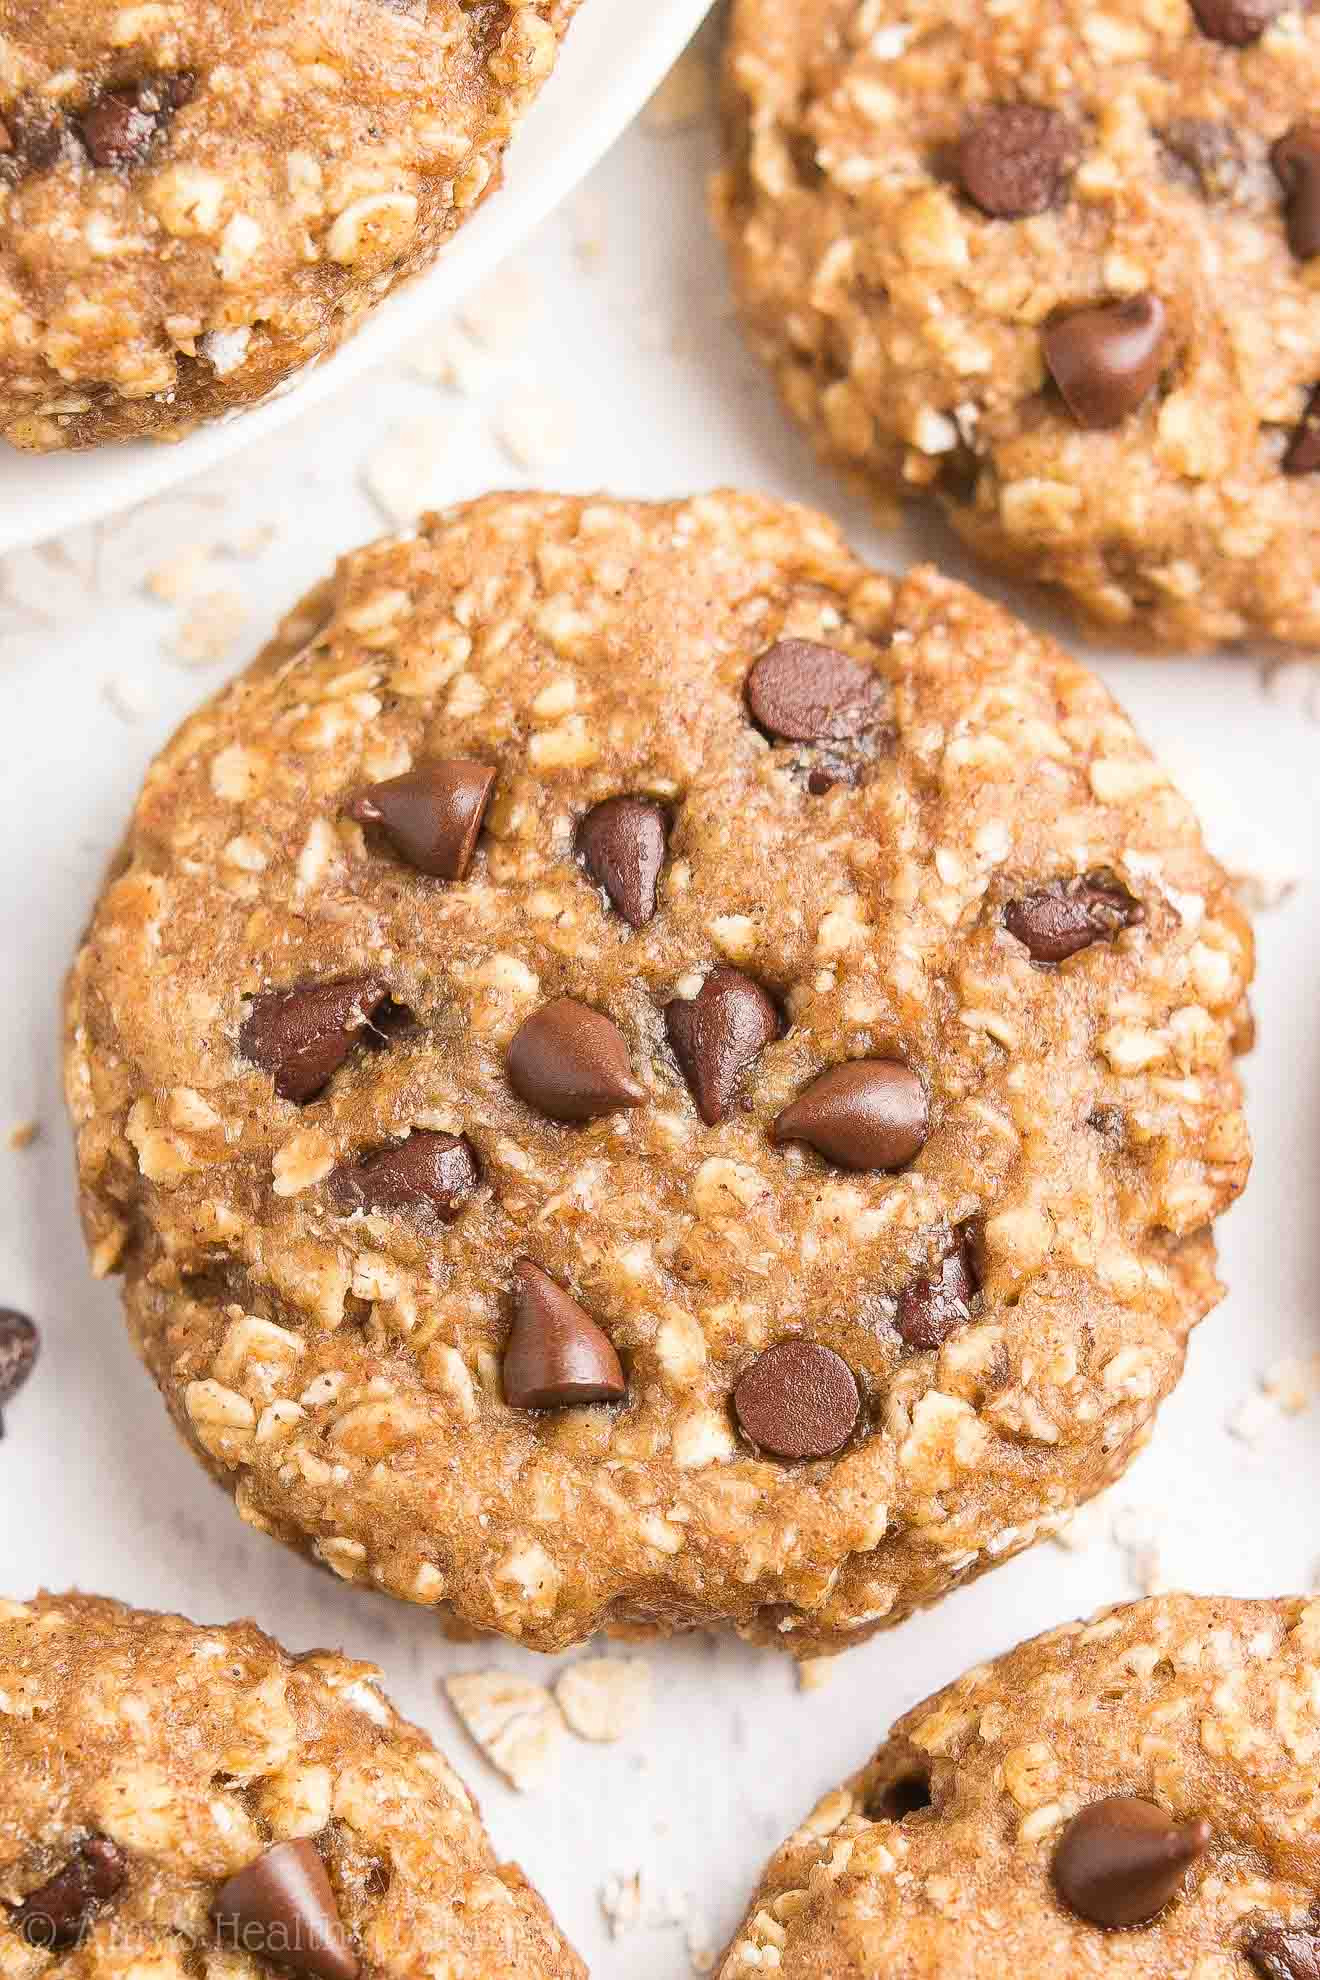 Oatmeal Peanut butter Chocolate Chip Cookies New Healthy Chocolate Chip Peanut butter Oatmeal Breakfast